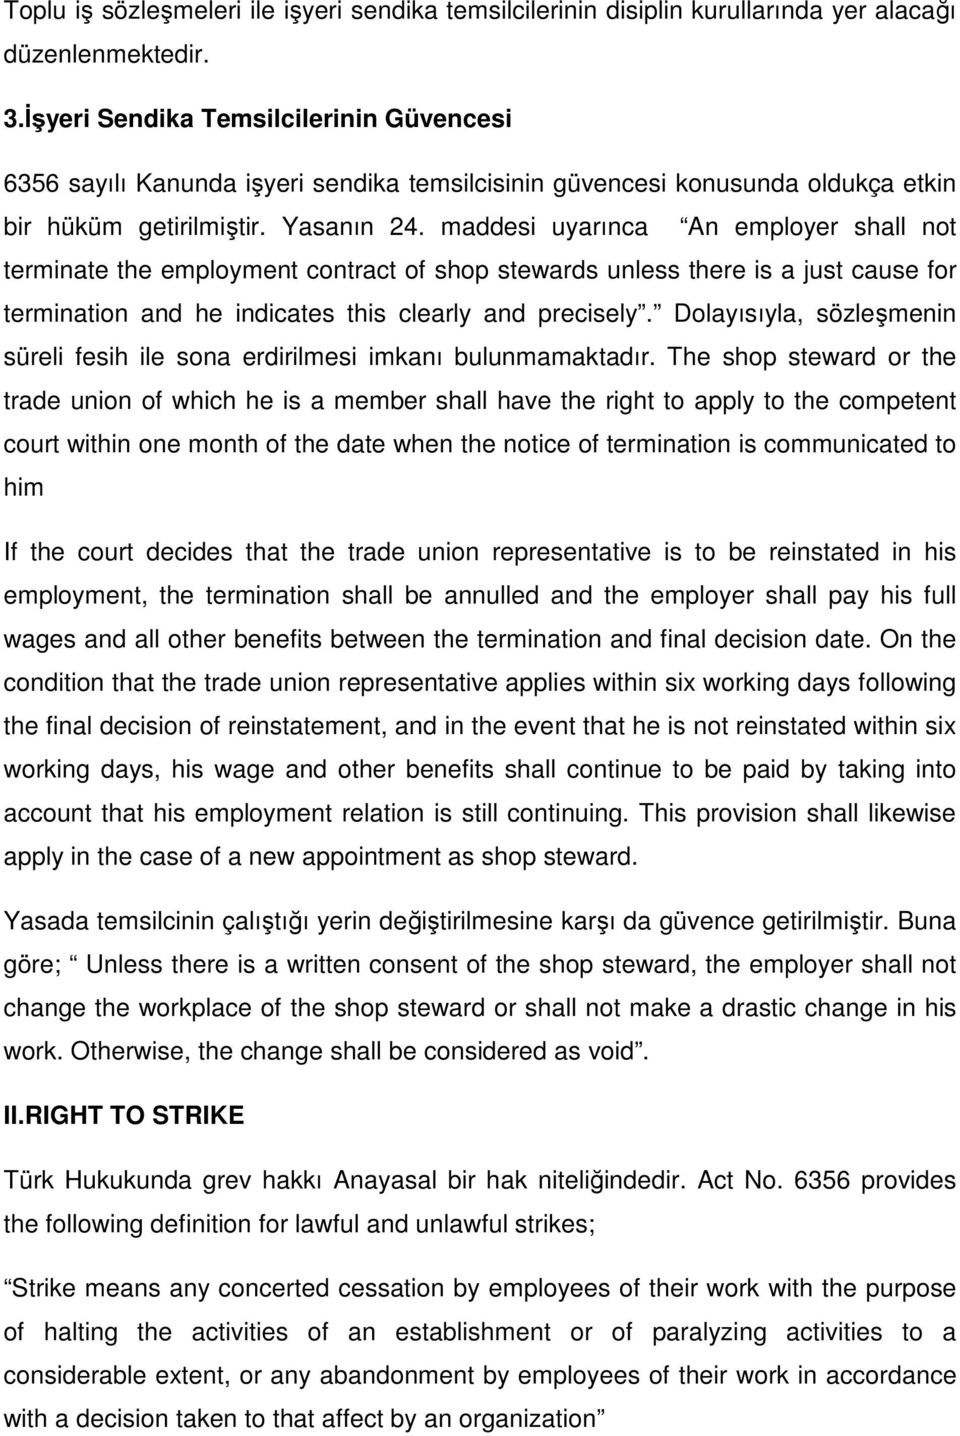 maddesi uyarınca An employer shall not terminate the employment contract of shop stewards unless there is a just cause for termination and he indicates this clearly and precisely.